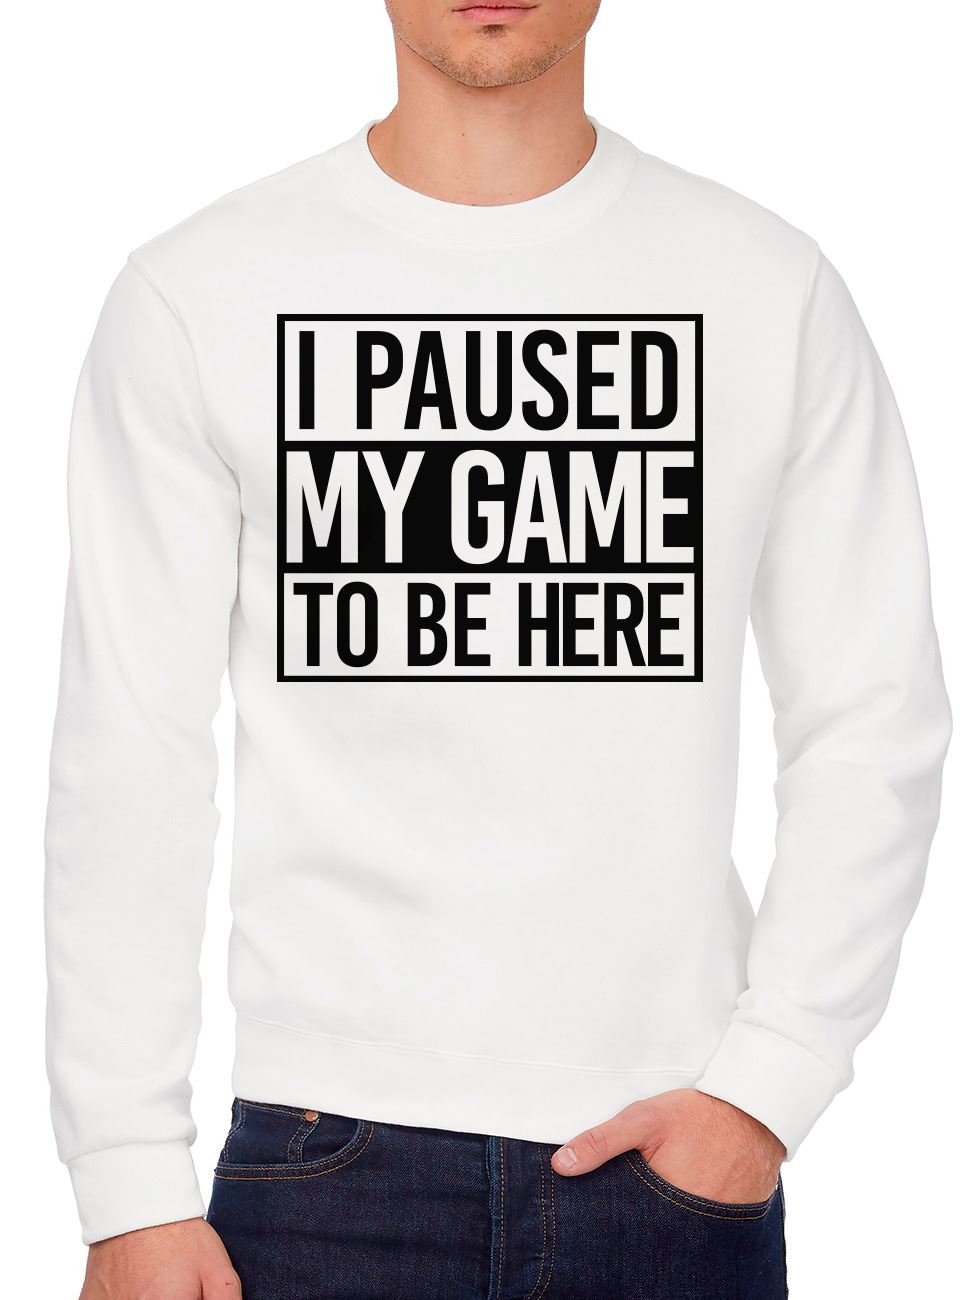 I Paused My Game to Be Here - Youth & Mens Sweatshirt